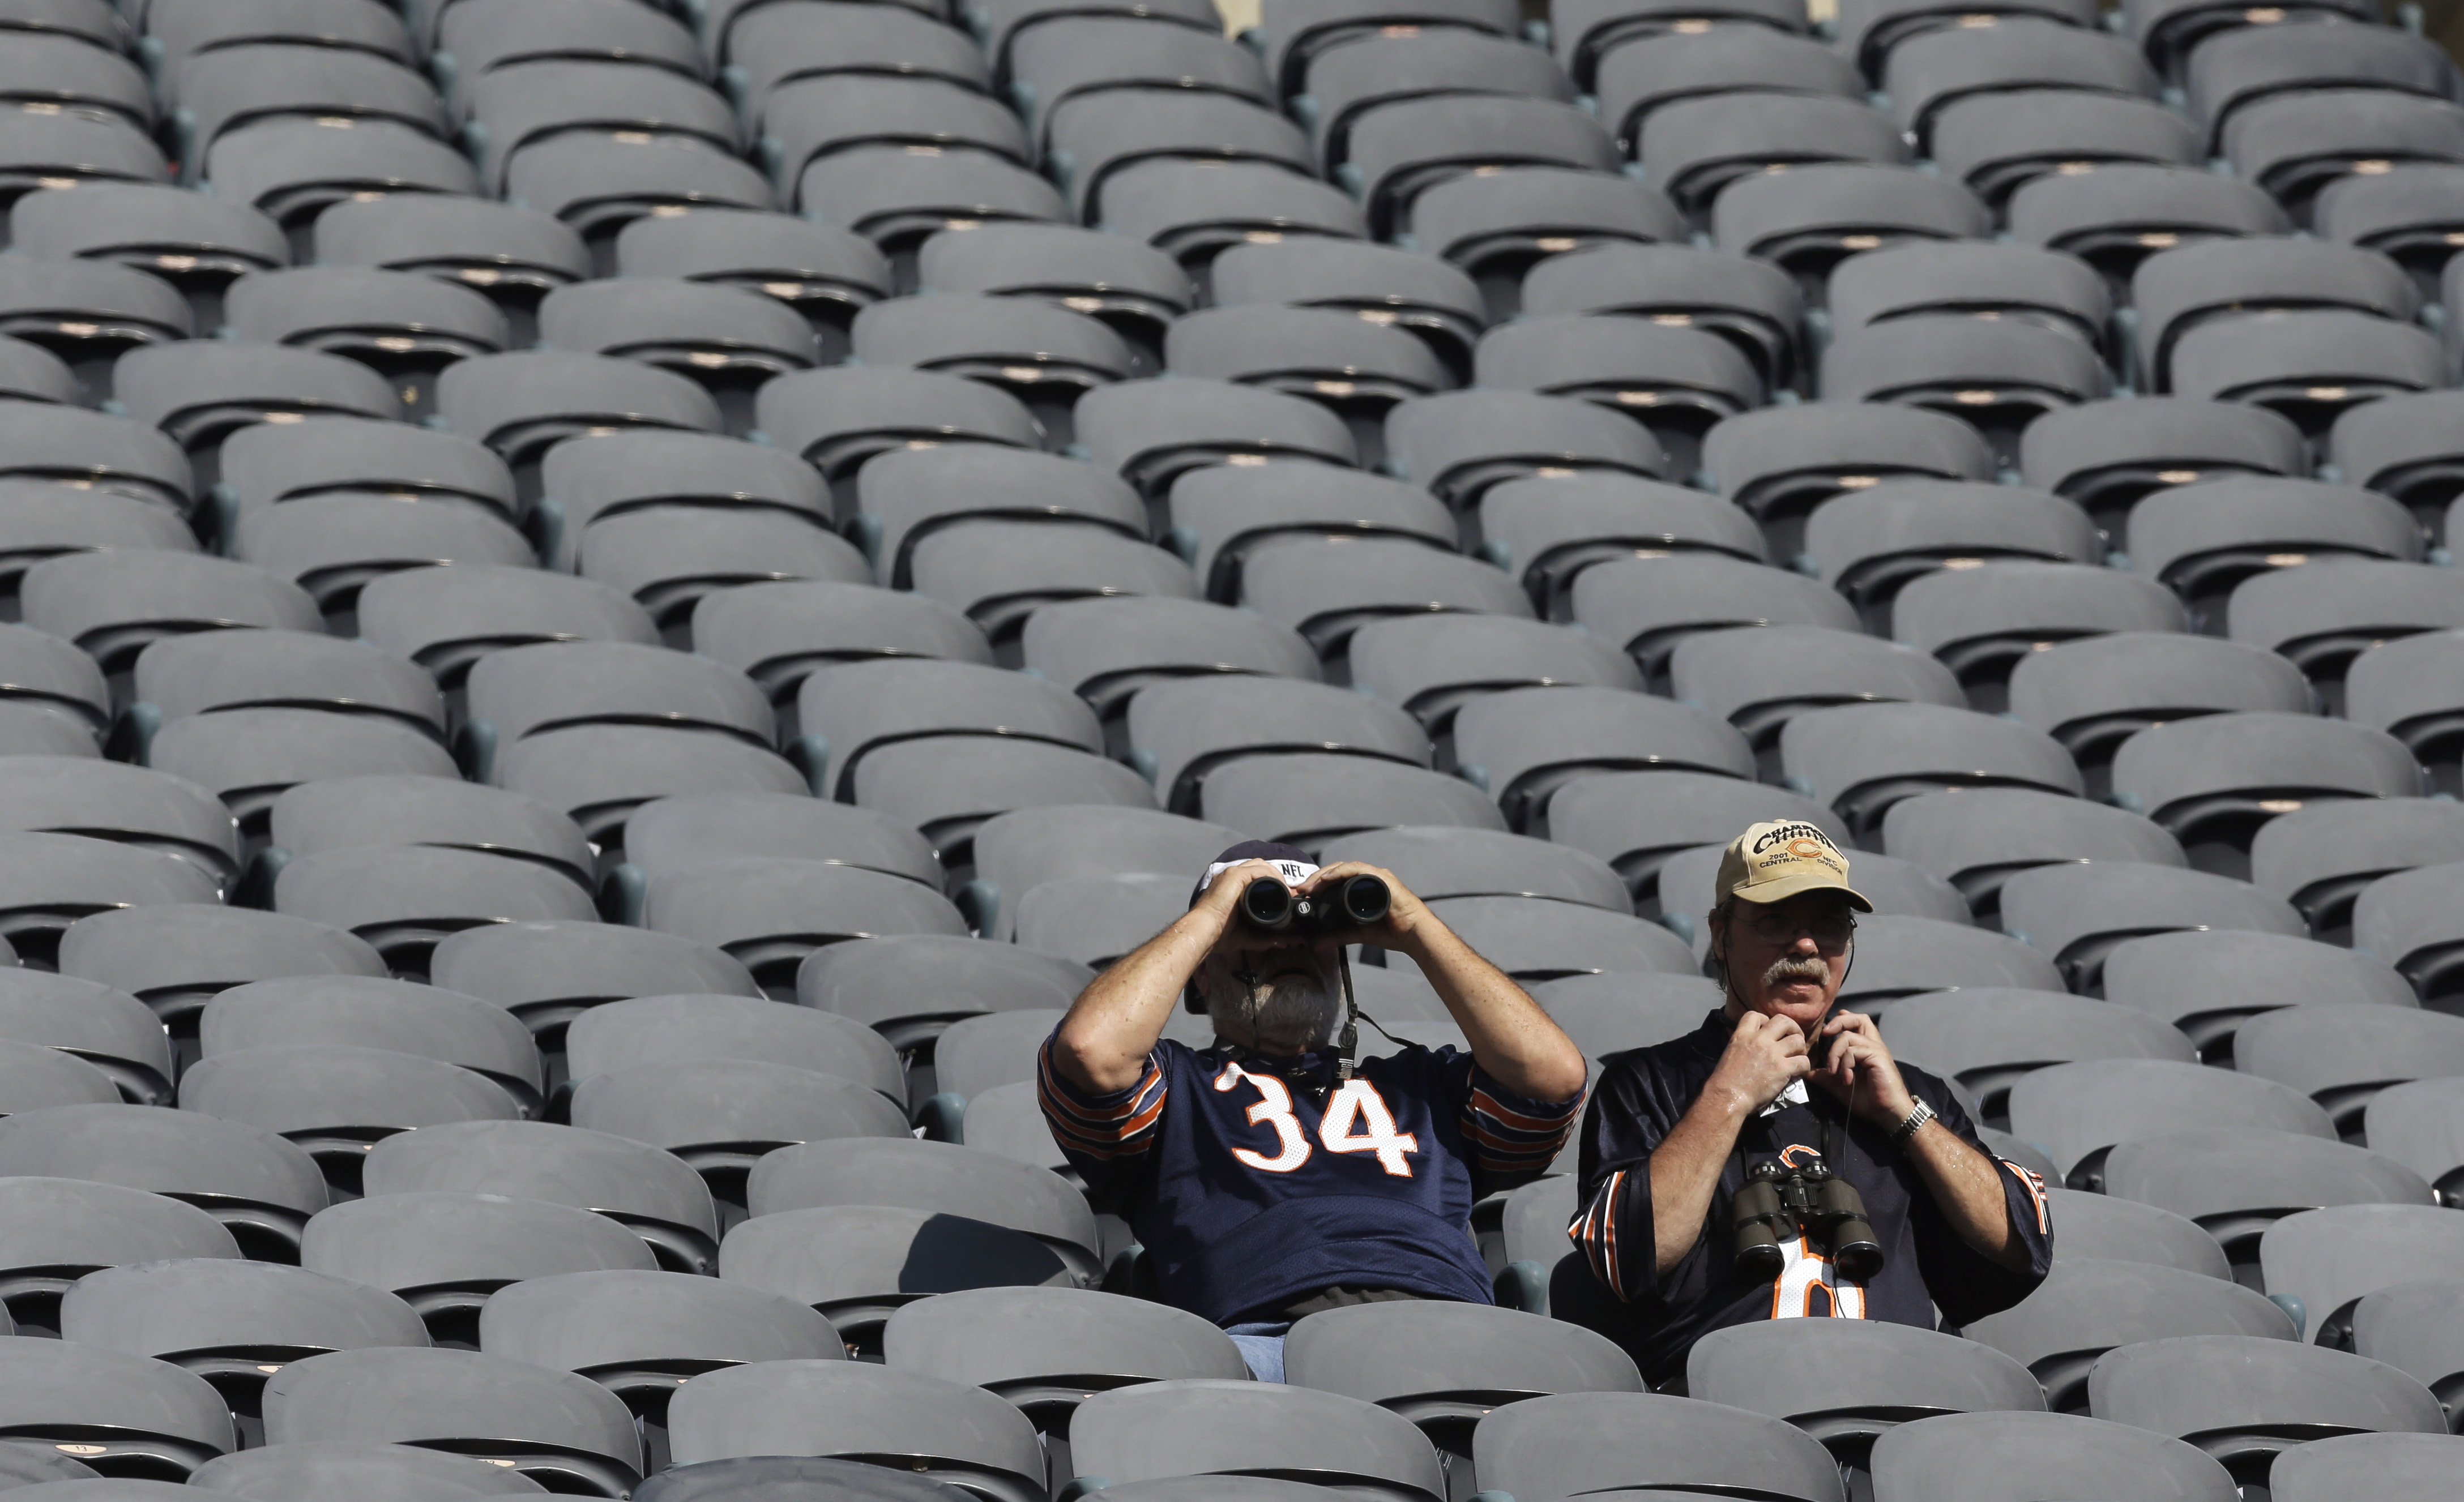 Chicago Bears fans watch the warmups before an NFL football game between the Bears and Green Bay Packers Sunday, Sept. 28, 2014, in Chicago. (AP Photo/Nam Y. Huh)